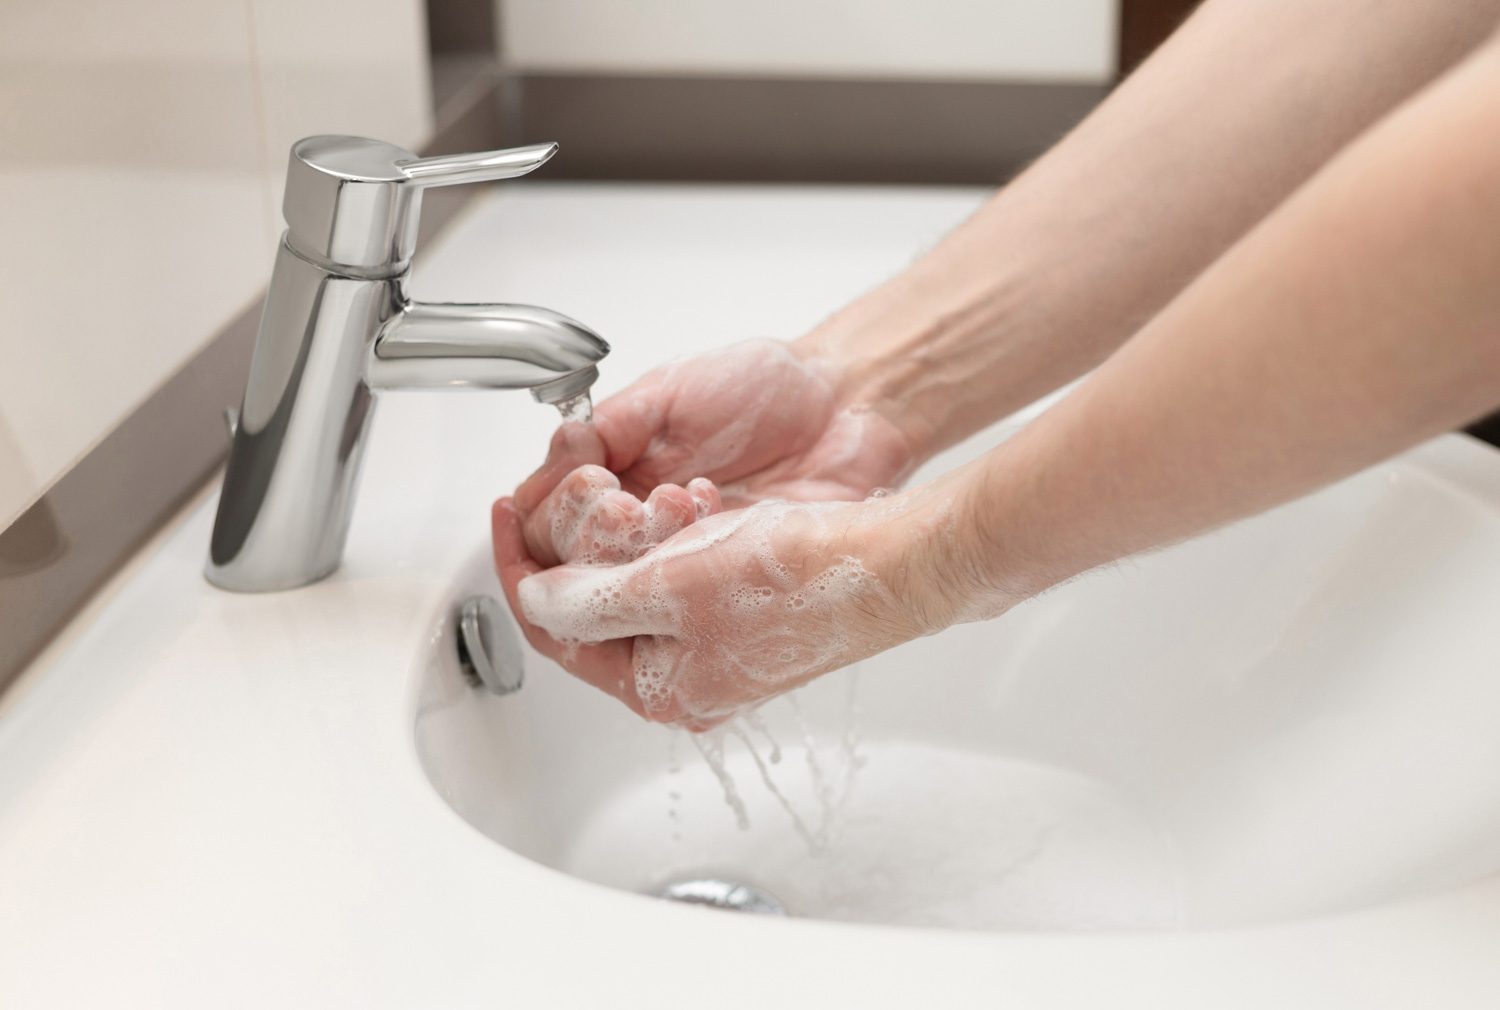 Hand washing concept. A man washes his hands in the bathroom with antibacterial soap. Personal hygiene. Health care and coronavirus protection.